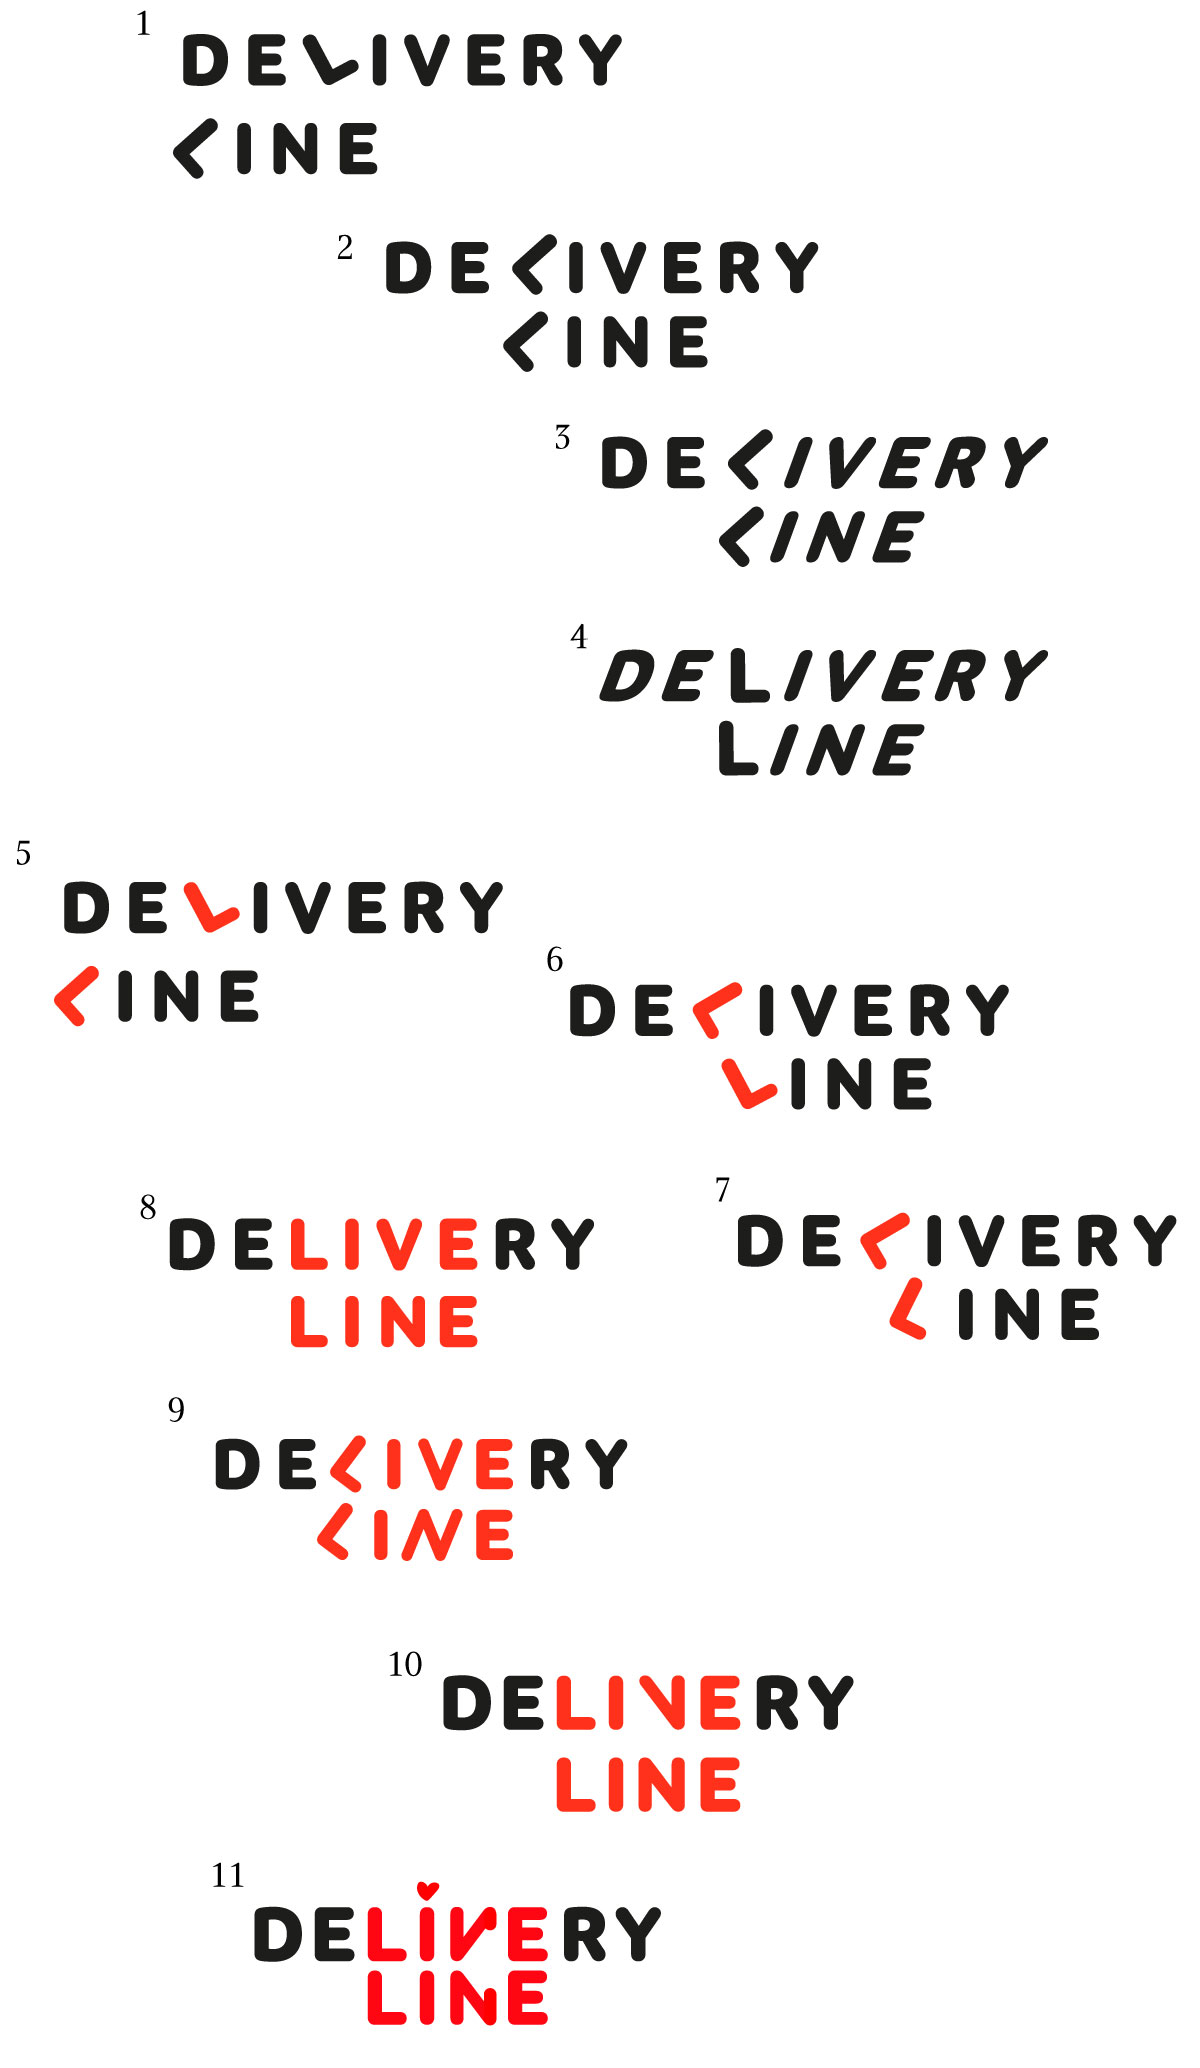 delivery line process 01